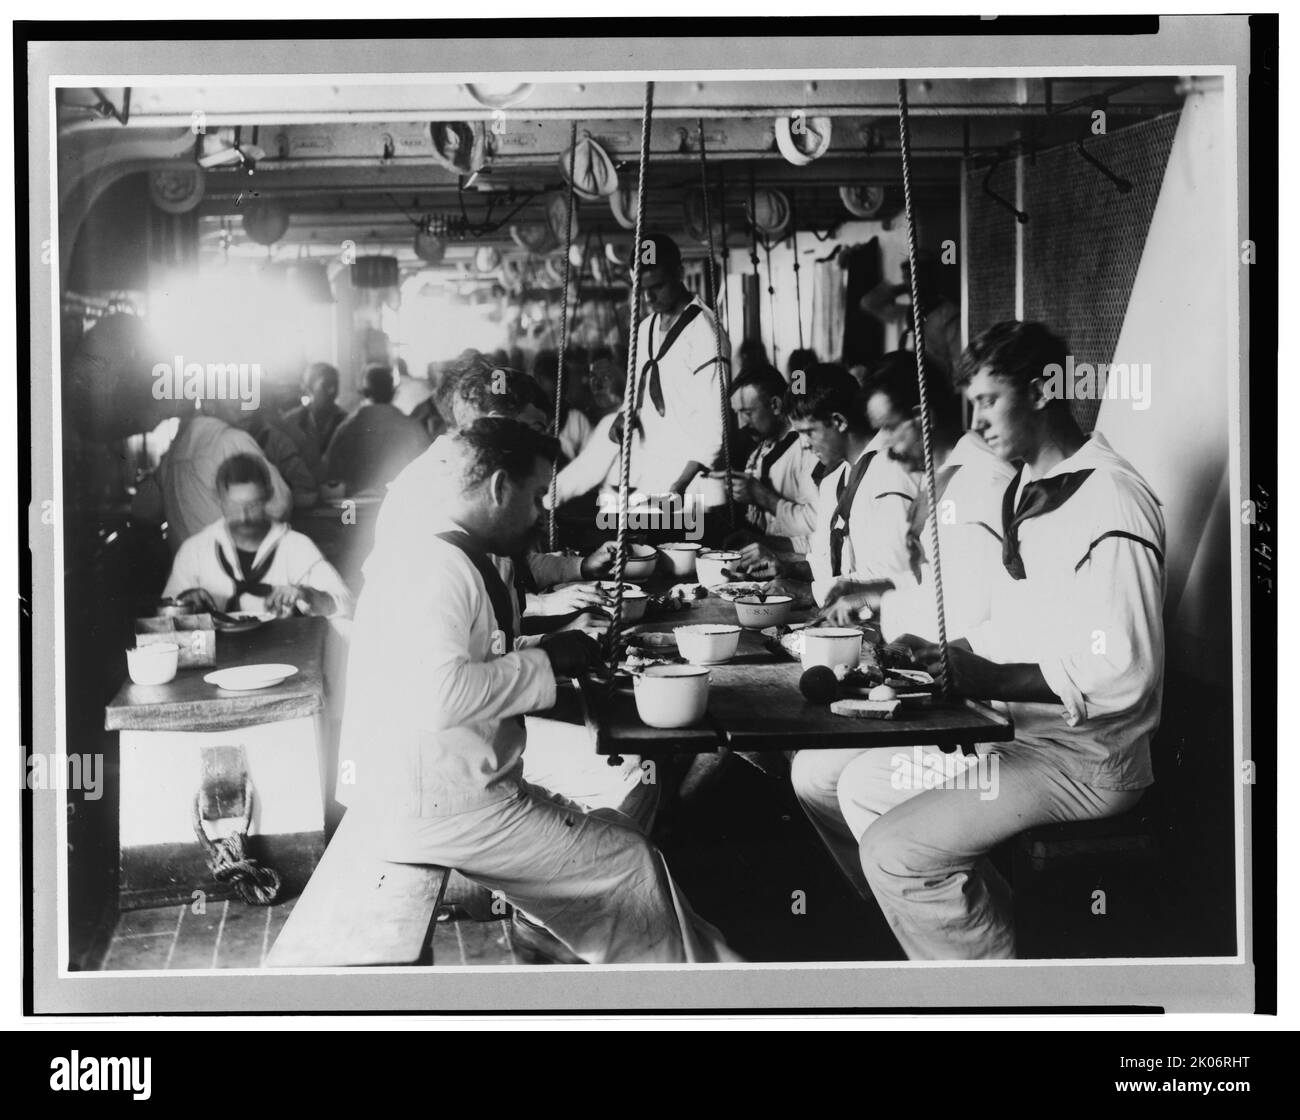 U.S.S. Olympia - crew's mess, 1899. Interior view of dining area aboard the USS Olympia, showing sailors eating at a table suspended by ropes. Stock Photo